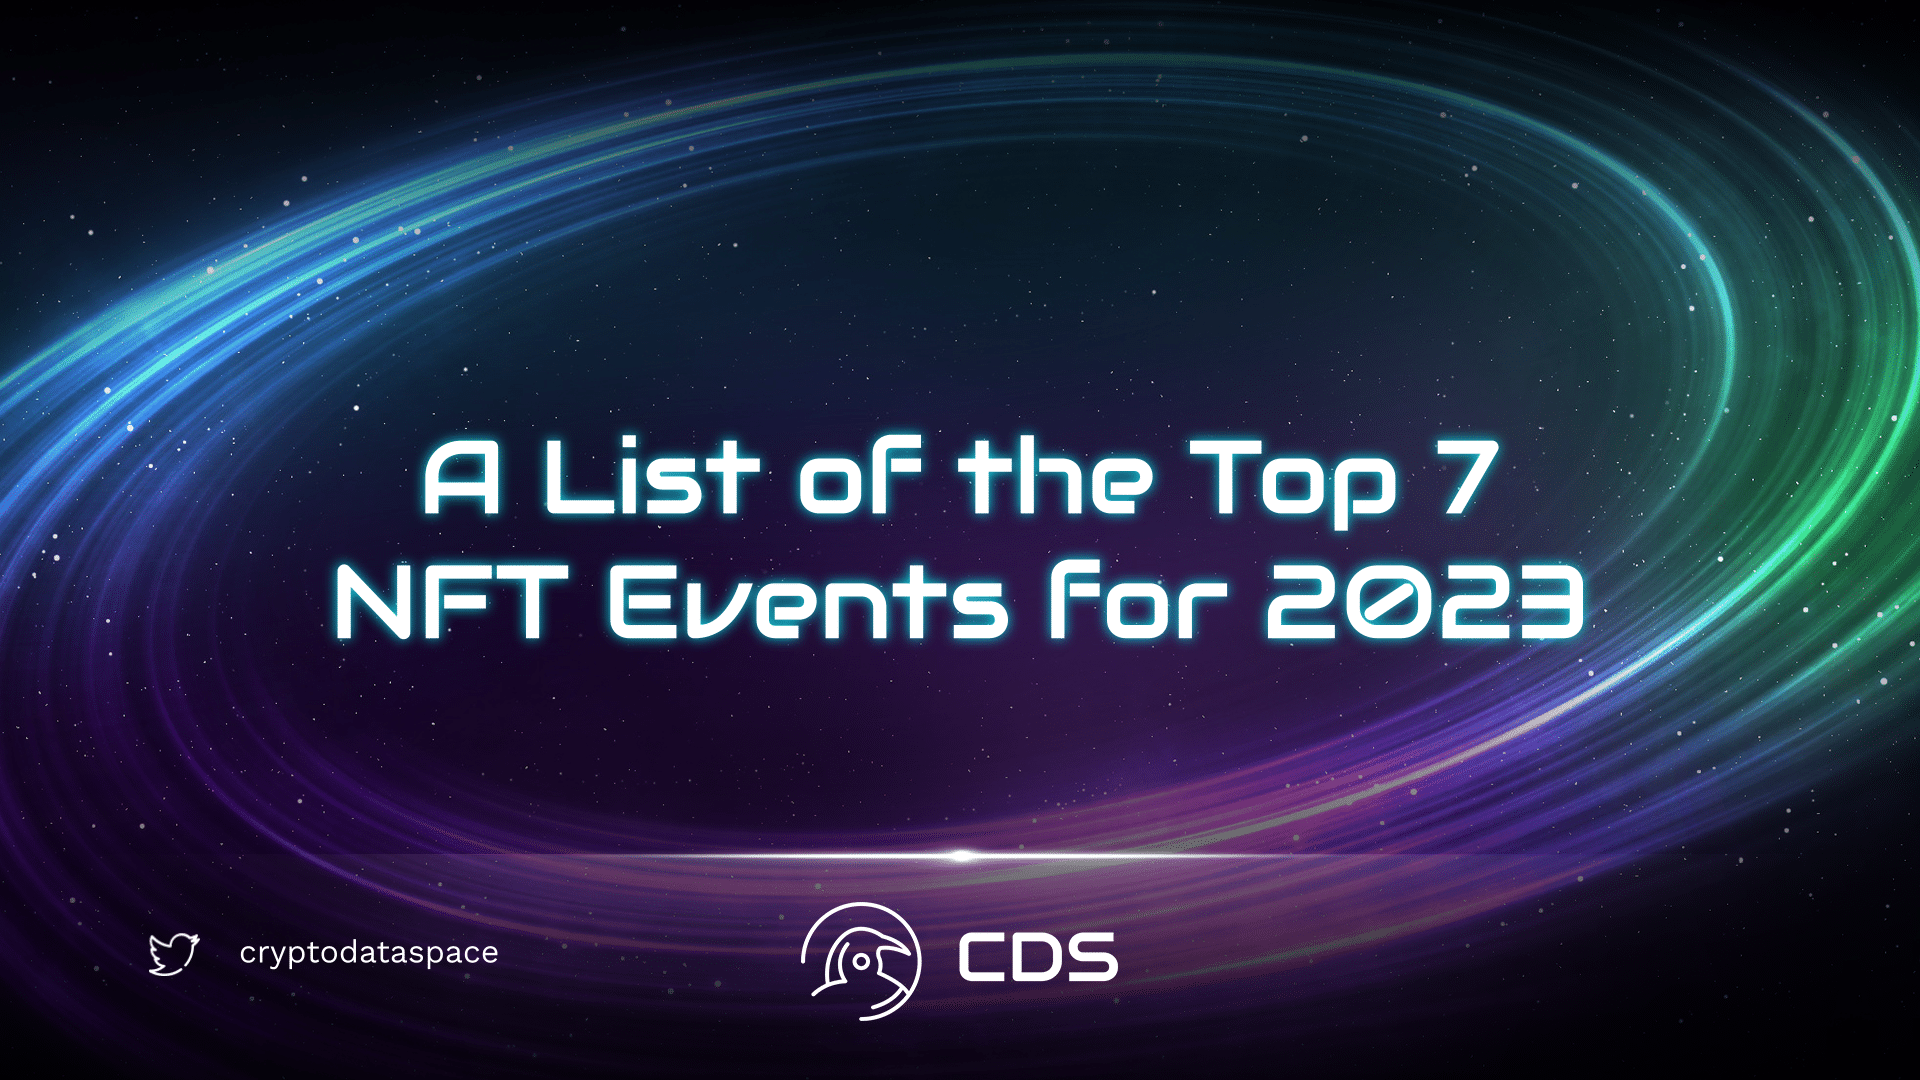 A List of the Top 7 NFT Events for 2023